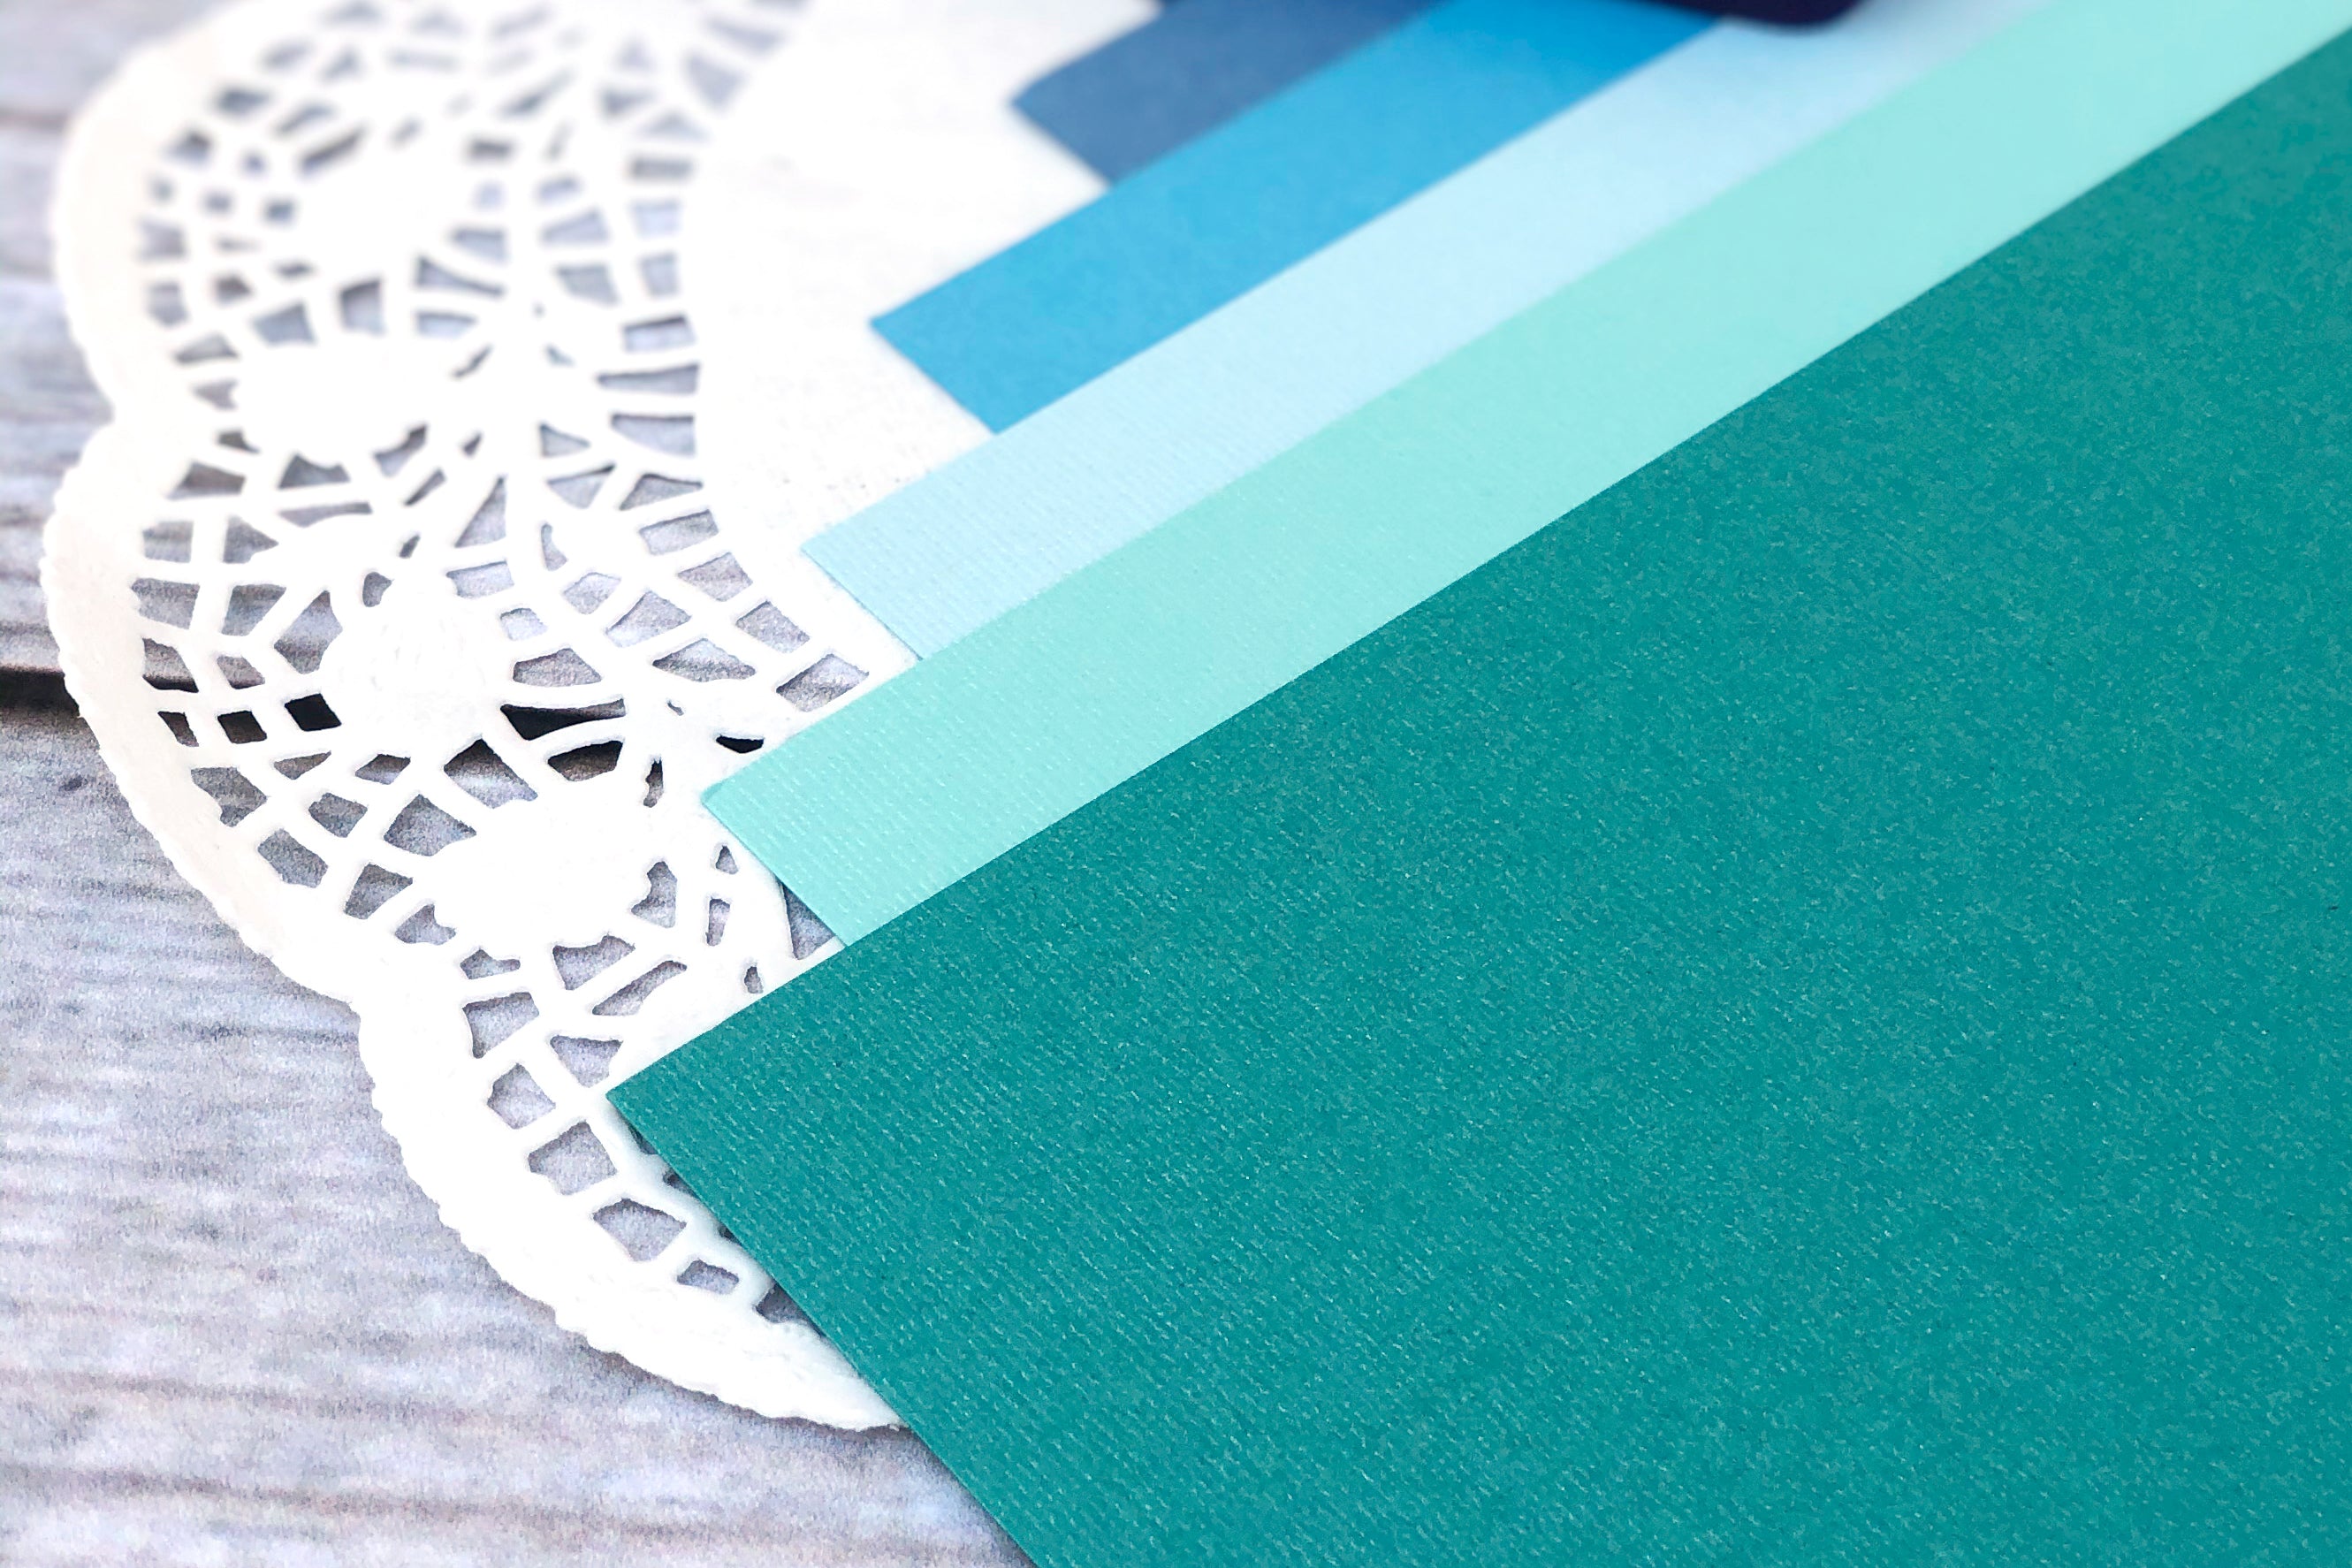 Which Cardstock Cuts Best on a Cricut or Silhouette Machine? – The